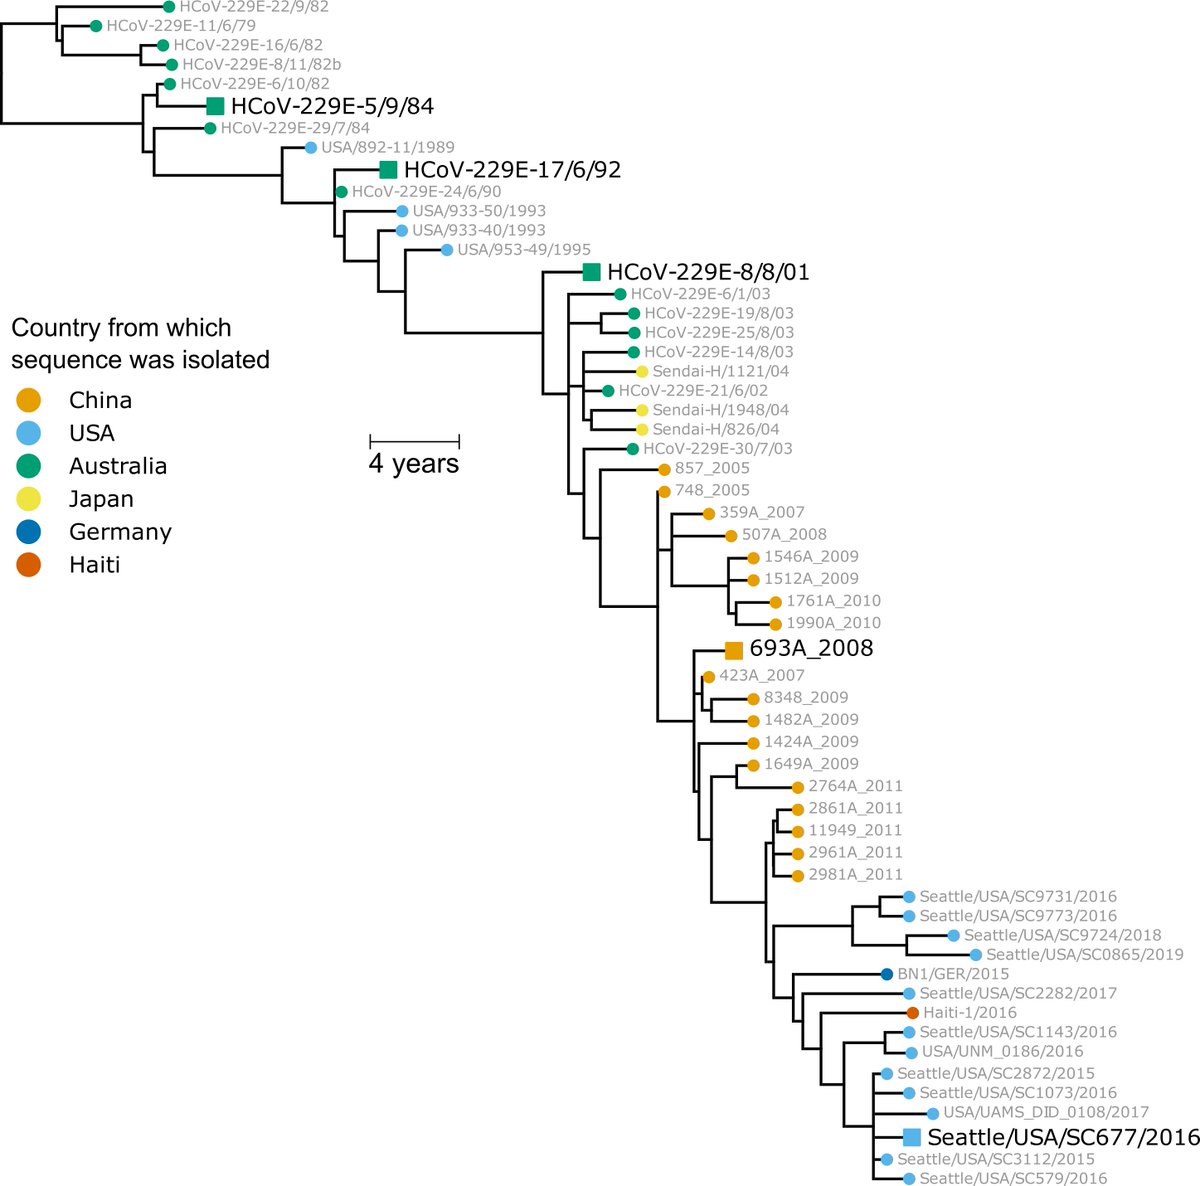 We first built a phylogenetic tree of CoV-229E evolution from 1984 to the present, and experimentally reconstructed the spike from viruses at 8 year intervals (1984, 1992, etc; see large black strain names in tree below). (2/n)